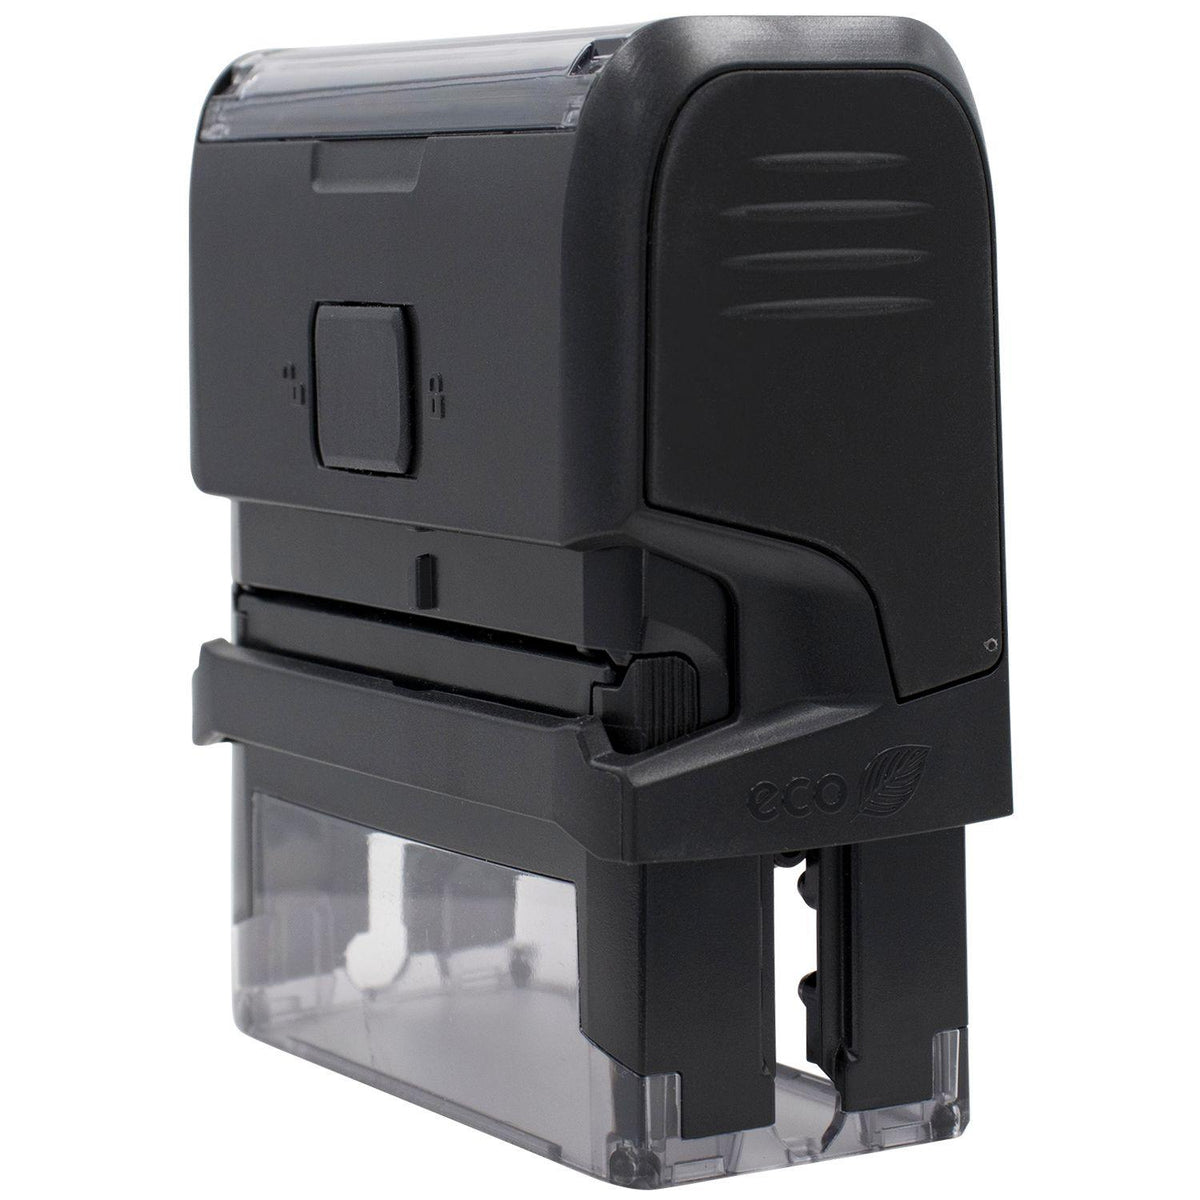 Large Self Inking Distributed Stamp - Engineer Seal Stamps - Brand_Trodat, Impression Size_Large, Stamp Type_Self-Inking Stamp, Type of Use_Professional